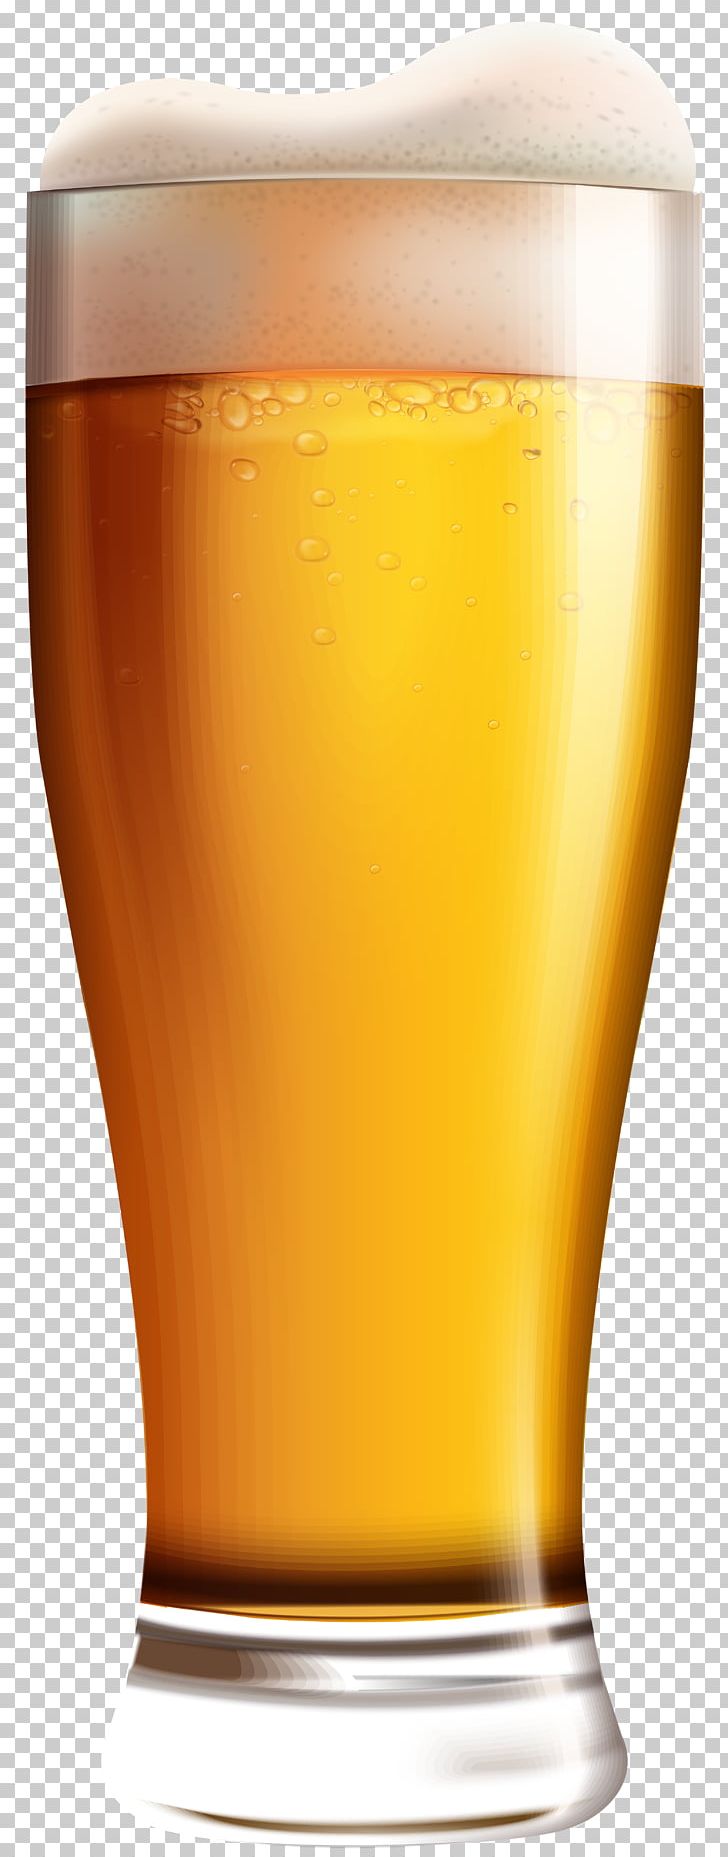 Wheat Beer Beer Pong PNG, Clipart, Art Glass, Beer, Beer Bottle, Beer Glass, Beer Glasses Free PNG Download